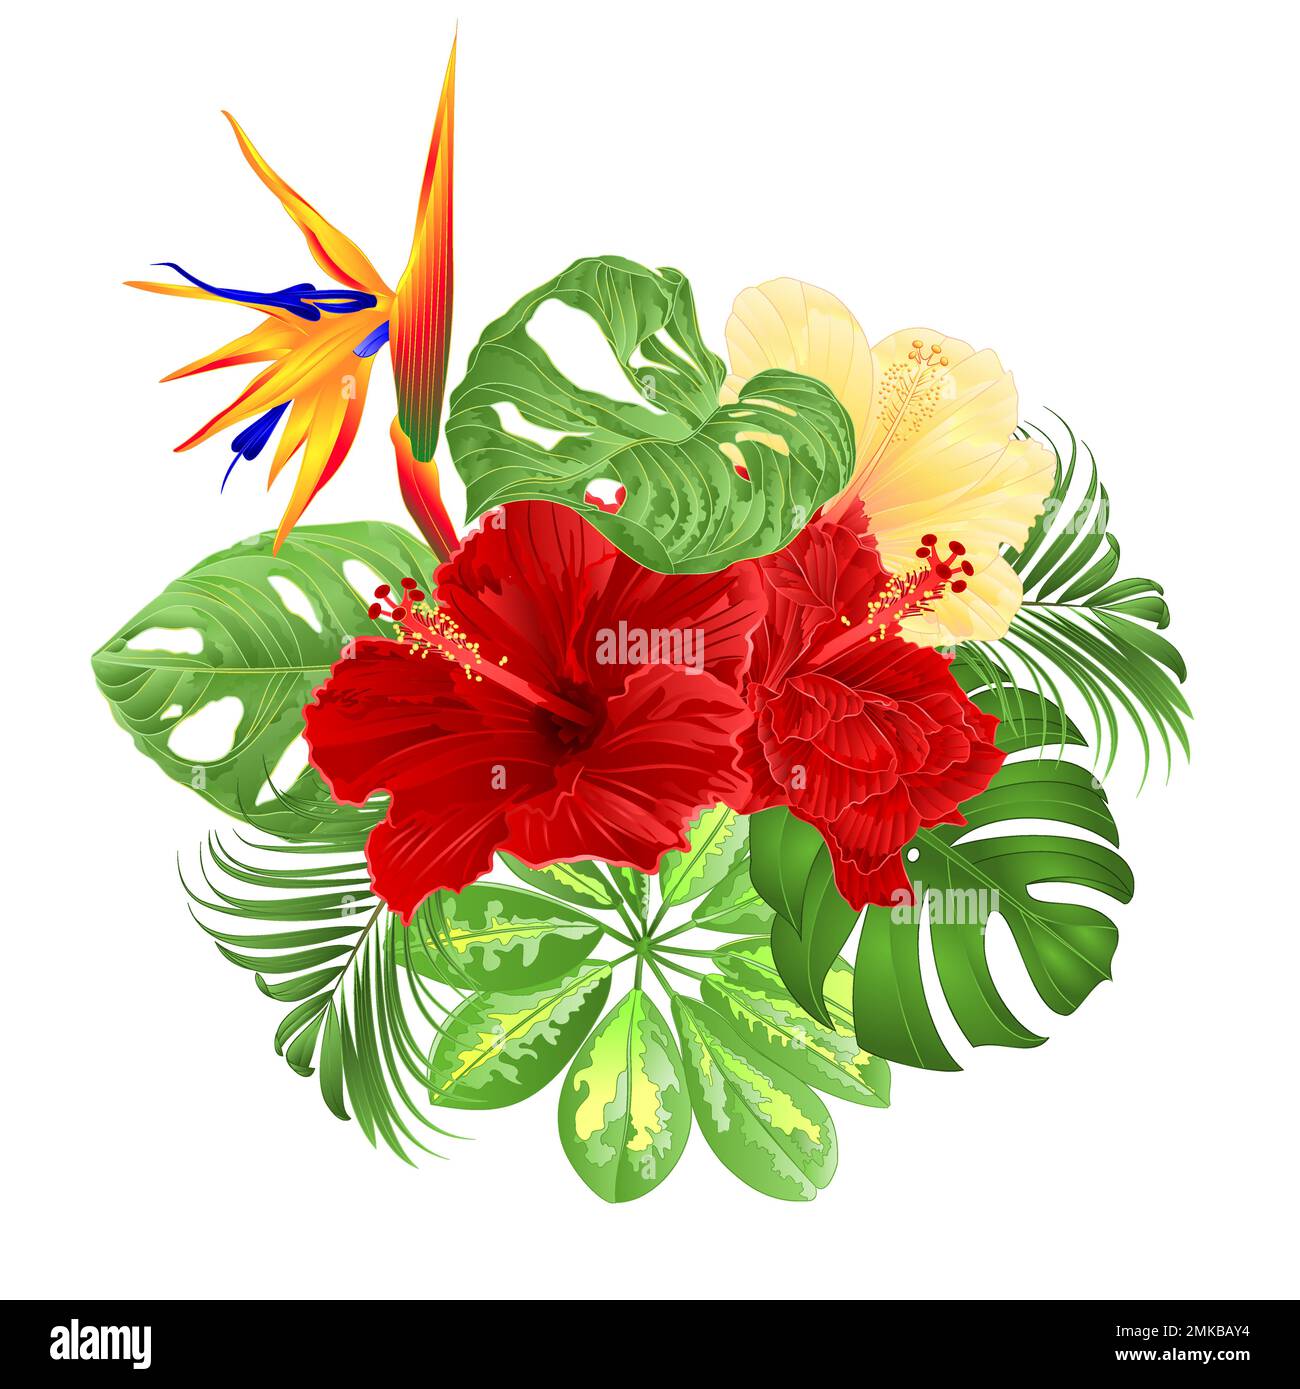 Bouquet with tropical flowers  floral arrangement with  Strelitzia and red and yellow hibiscus   palm,philodendron and Schefflera and Monstera  vintag Stock Vector